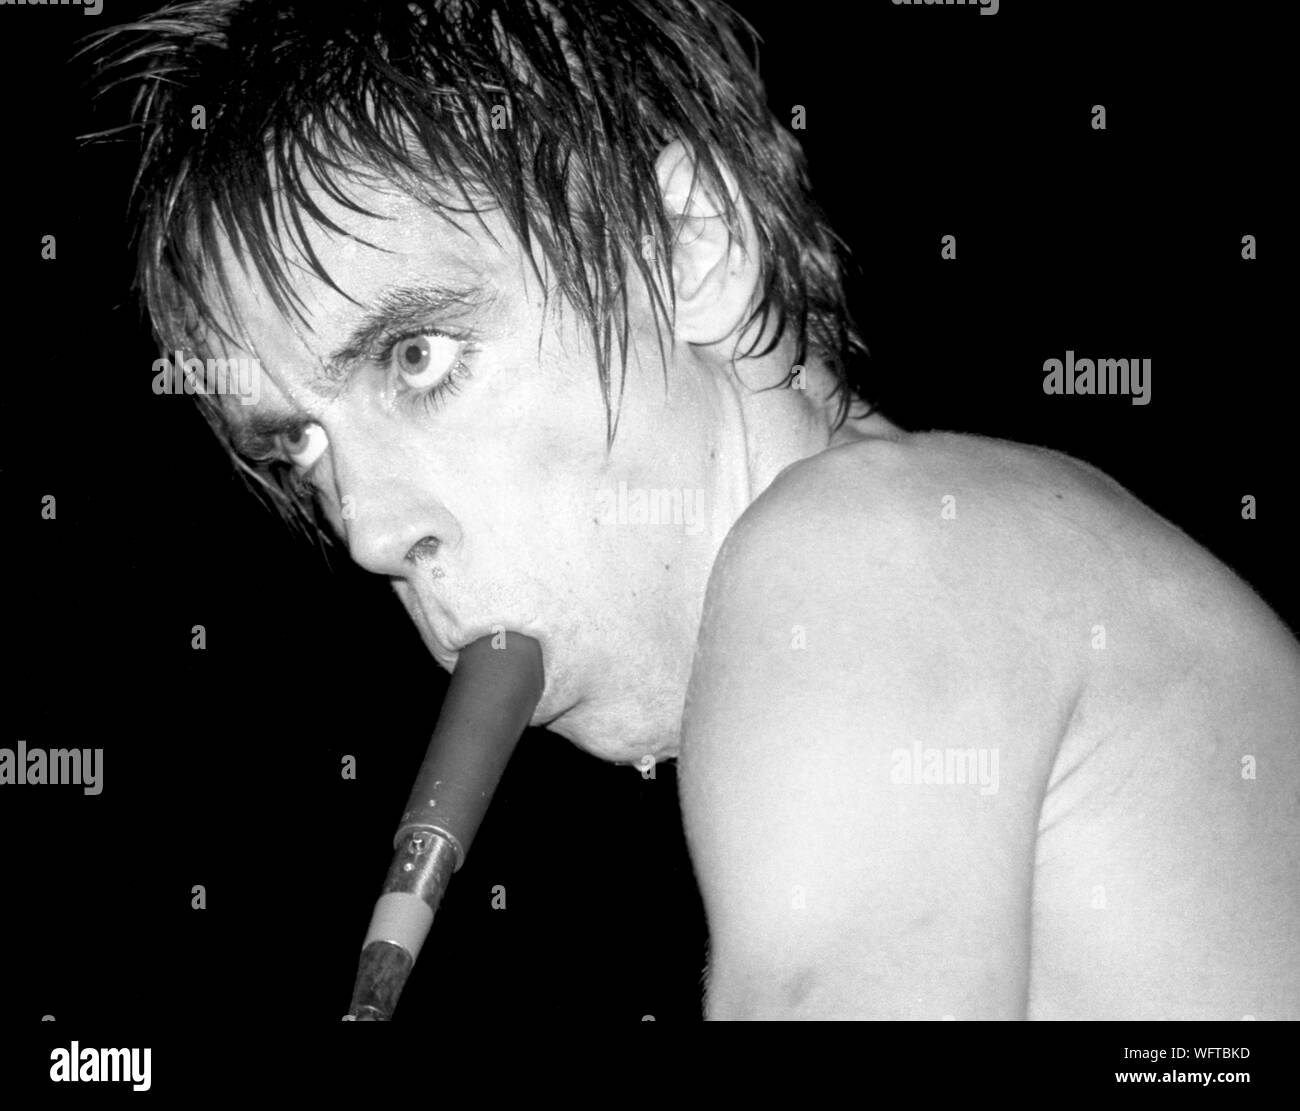 Iggy Pop performs onstage at the Palladium theater in New York City in  November 1977 with a microphone in his mouth Stock Photo - Alamy